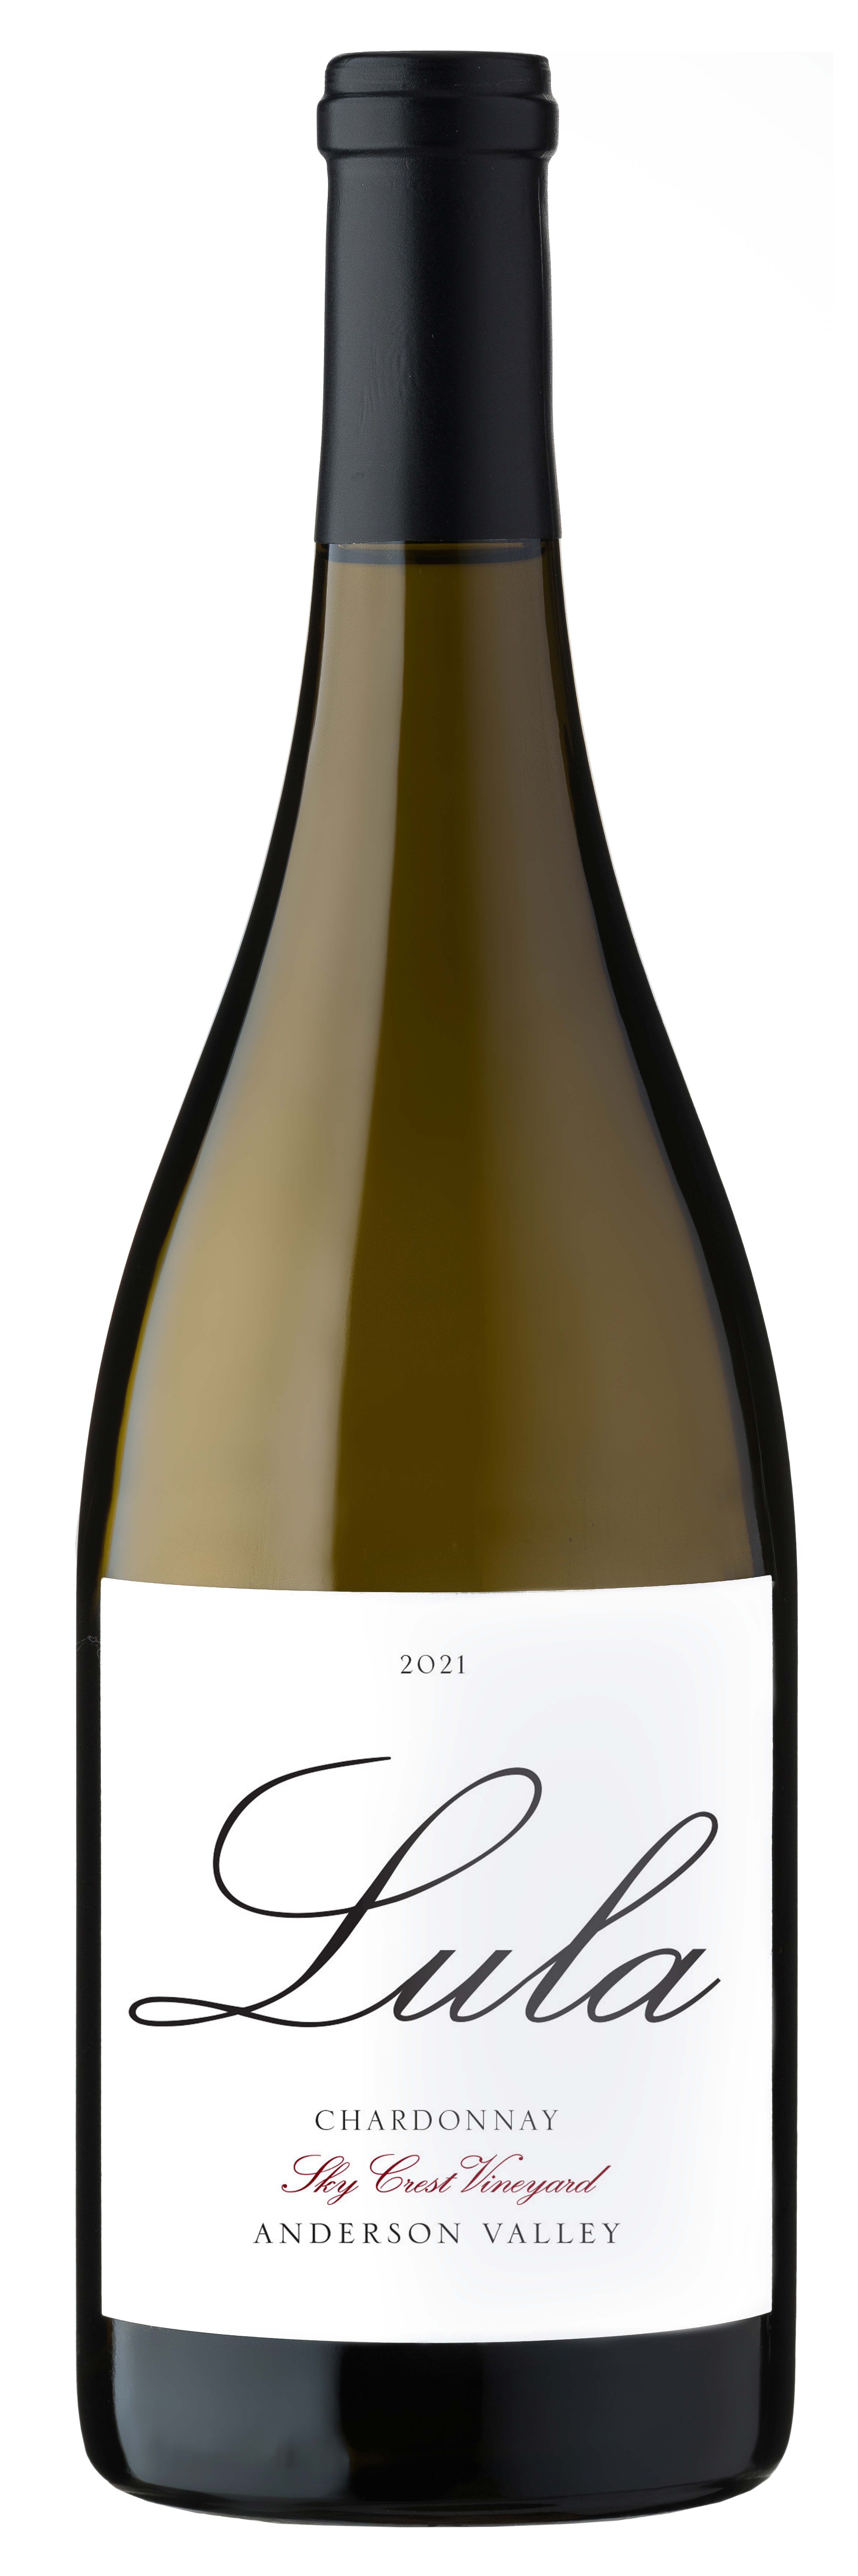 Product Image for 2021 Skycrest Chardonnay